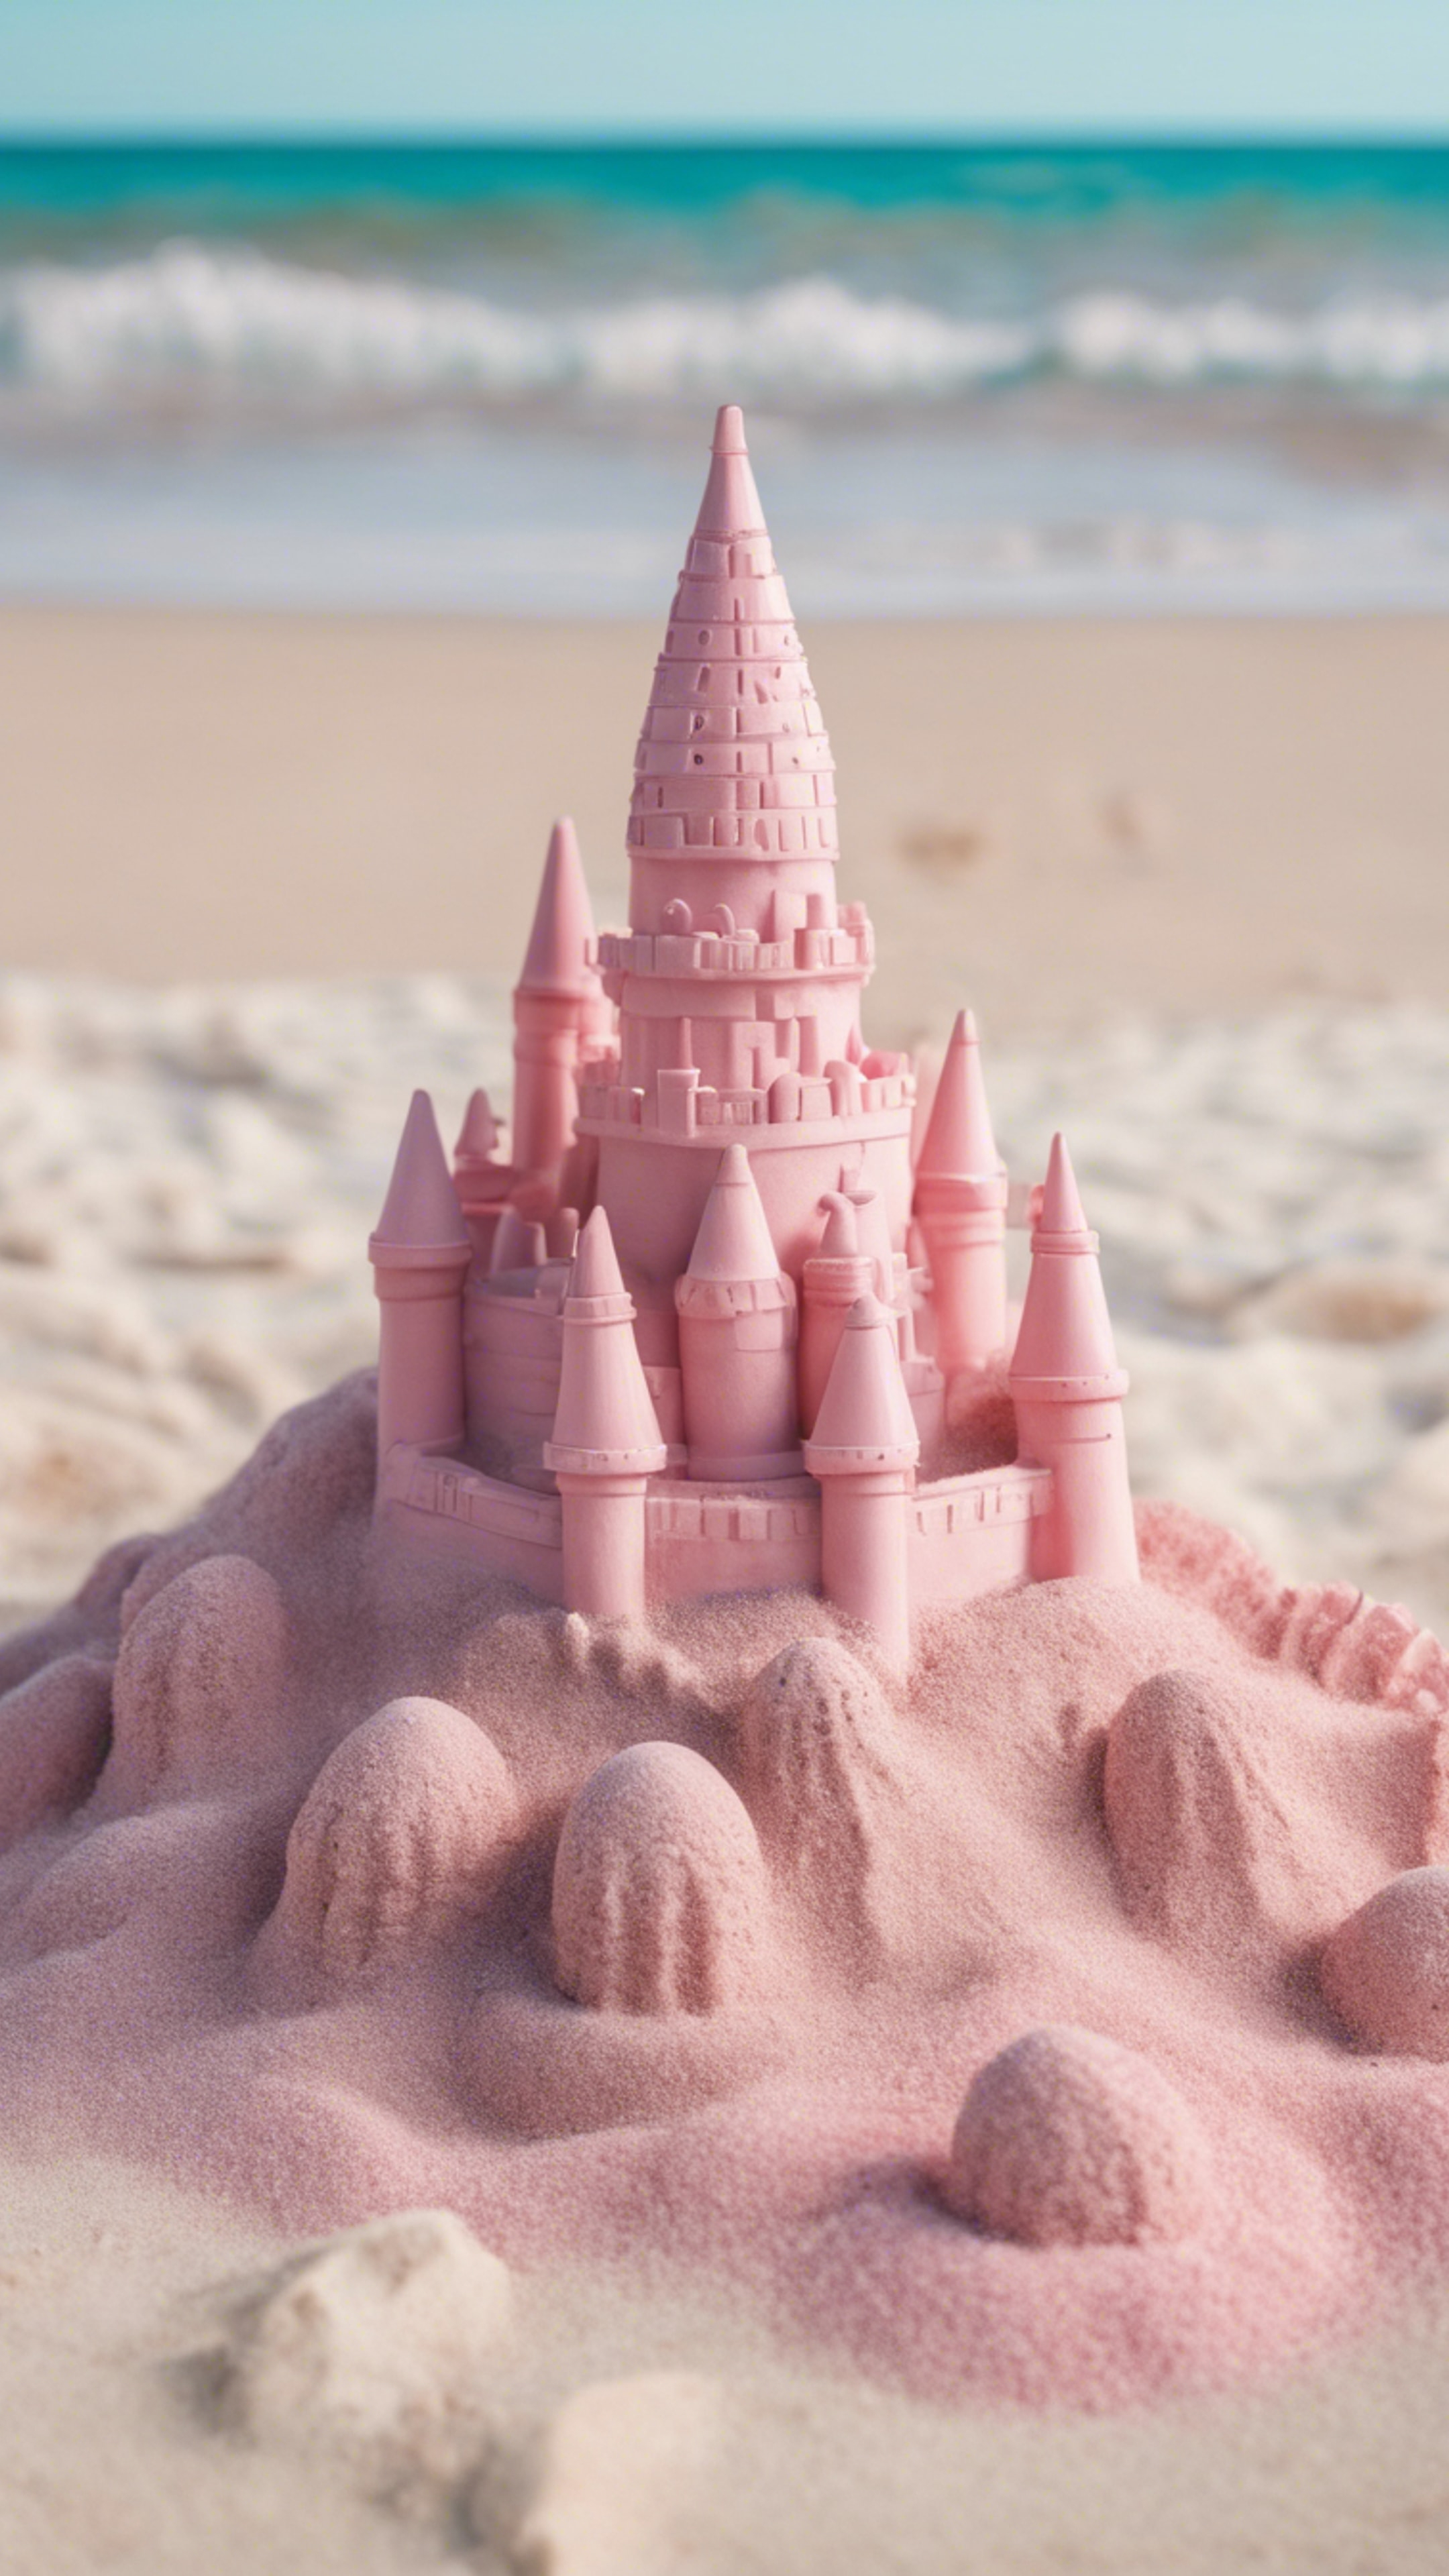 An intricate preppy pastel pink sandcastle on an idyllic beach with clear azure waters. Papel de parede[55e256d408524d5fa872]